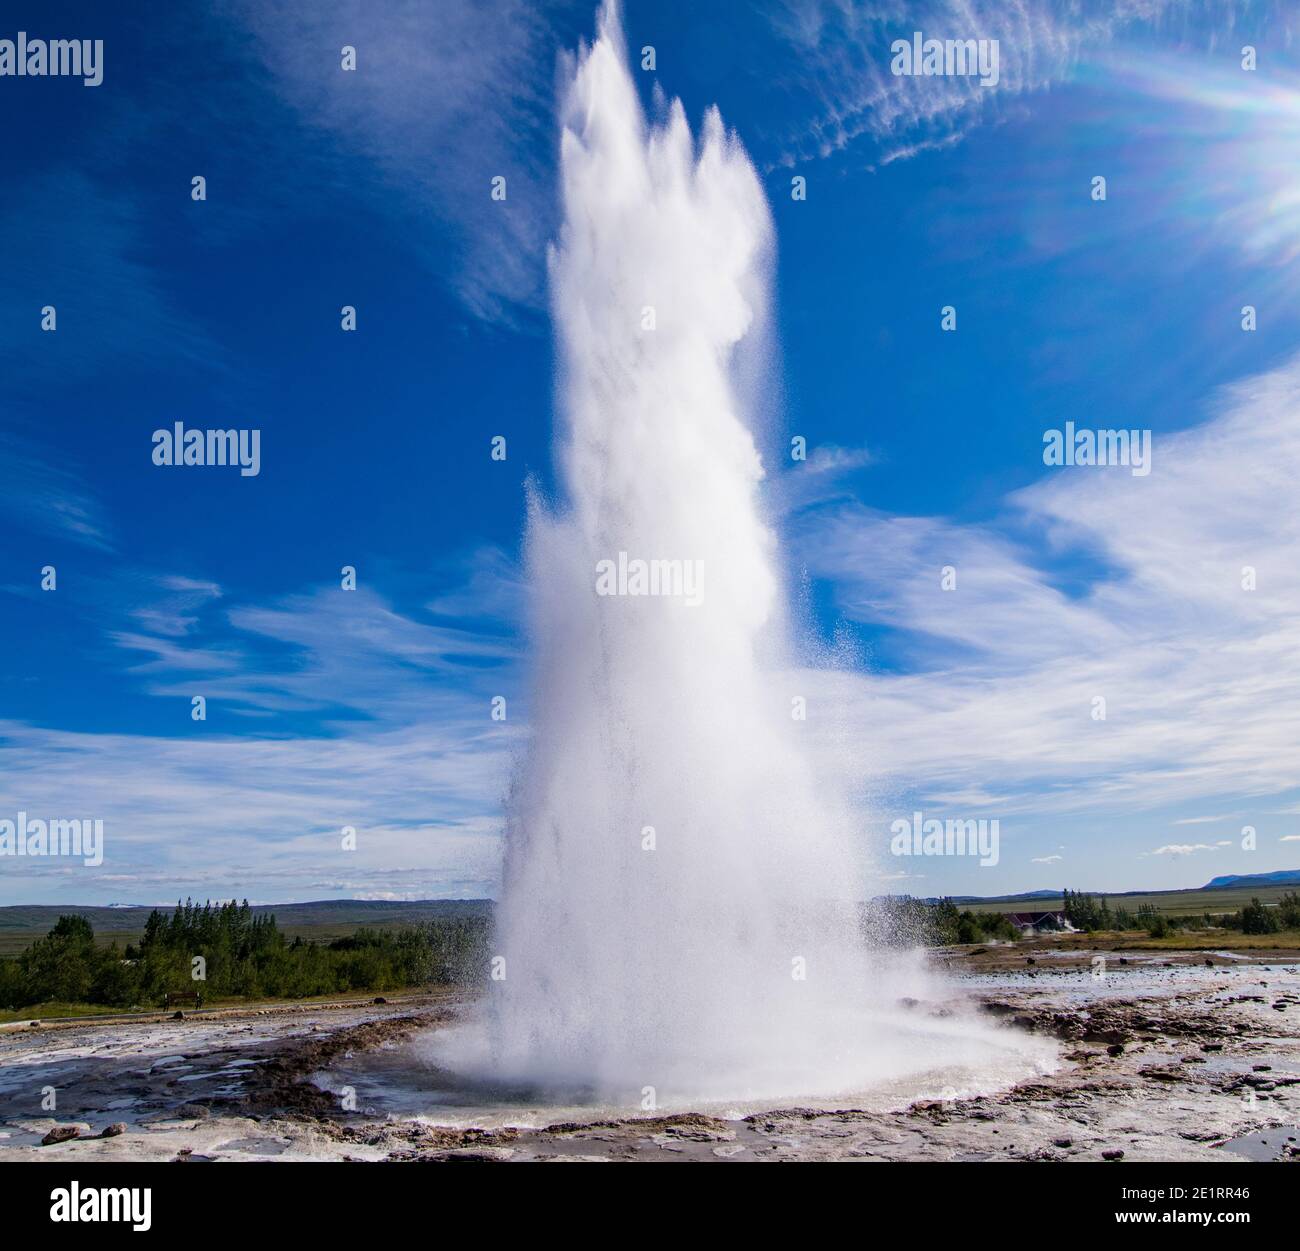 Eruption of the Strokkur geyser at the Haukadalur valley in Iceland Stock Photo